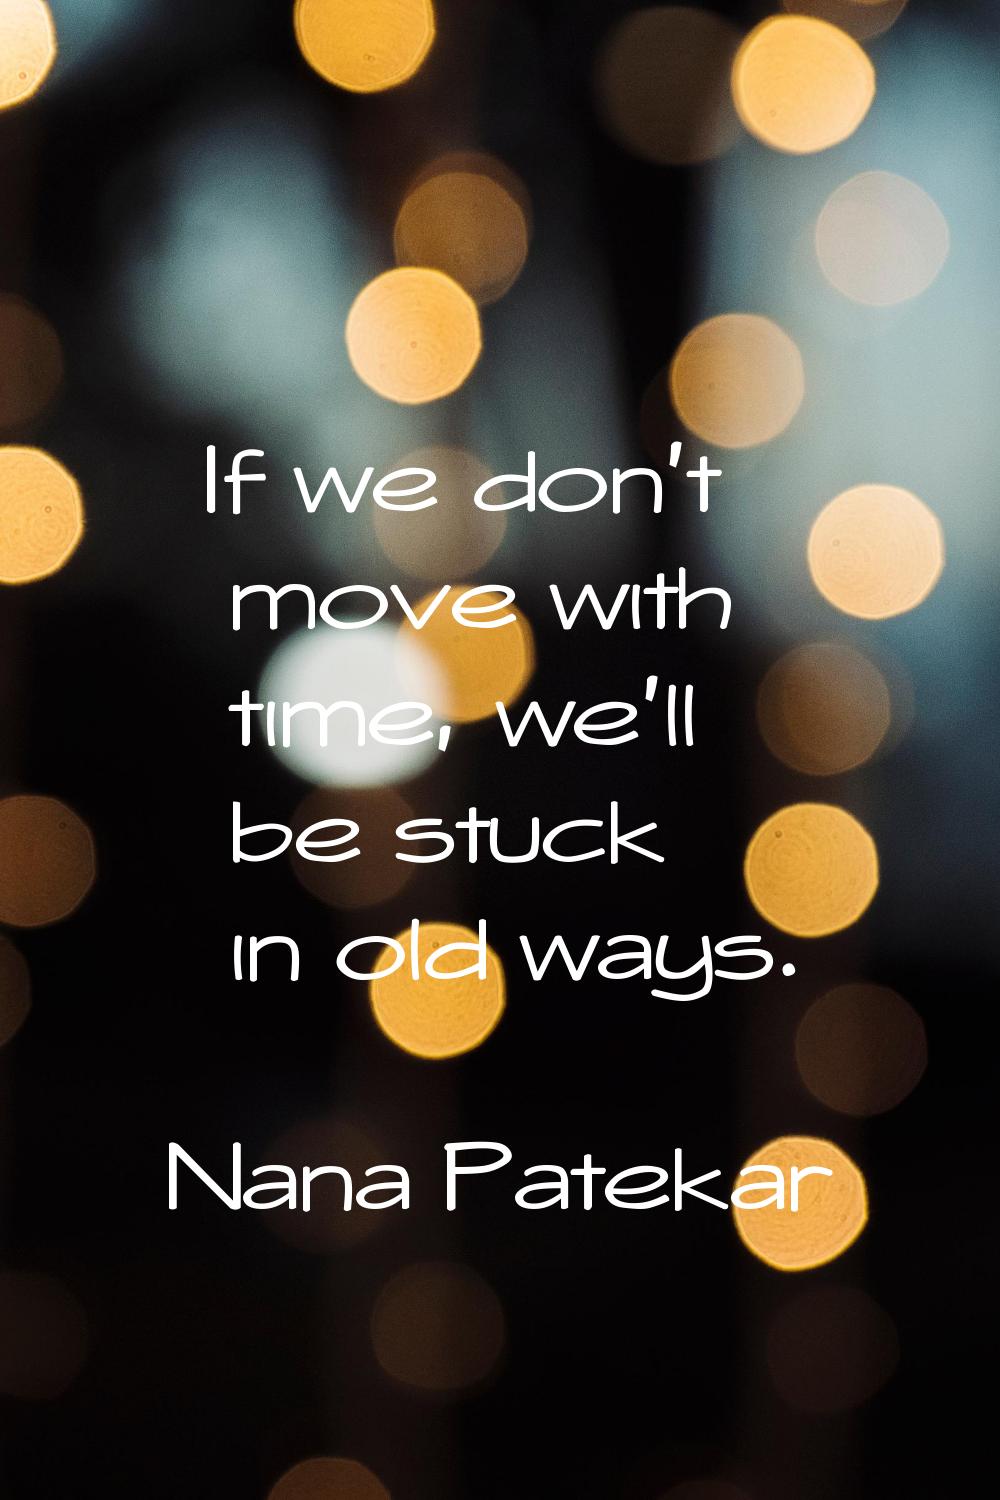 If we don't move with time, we'll be stuck in old ways.